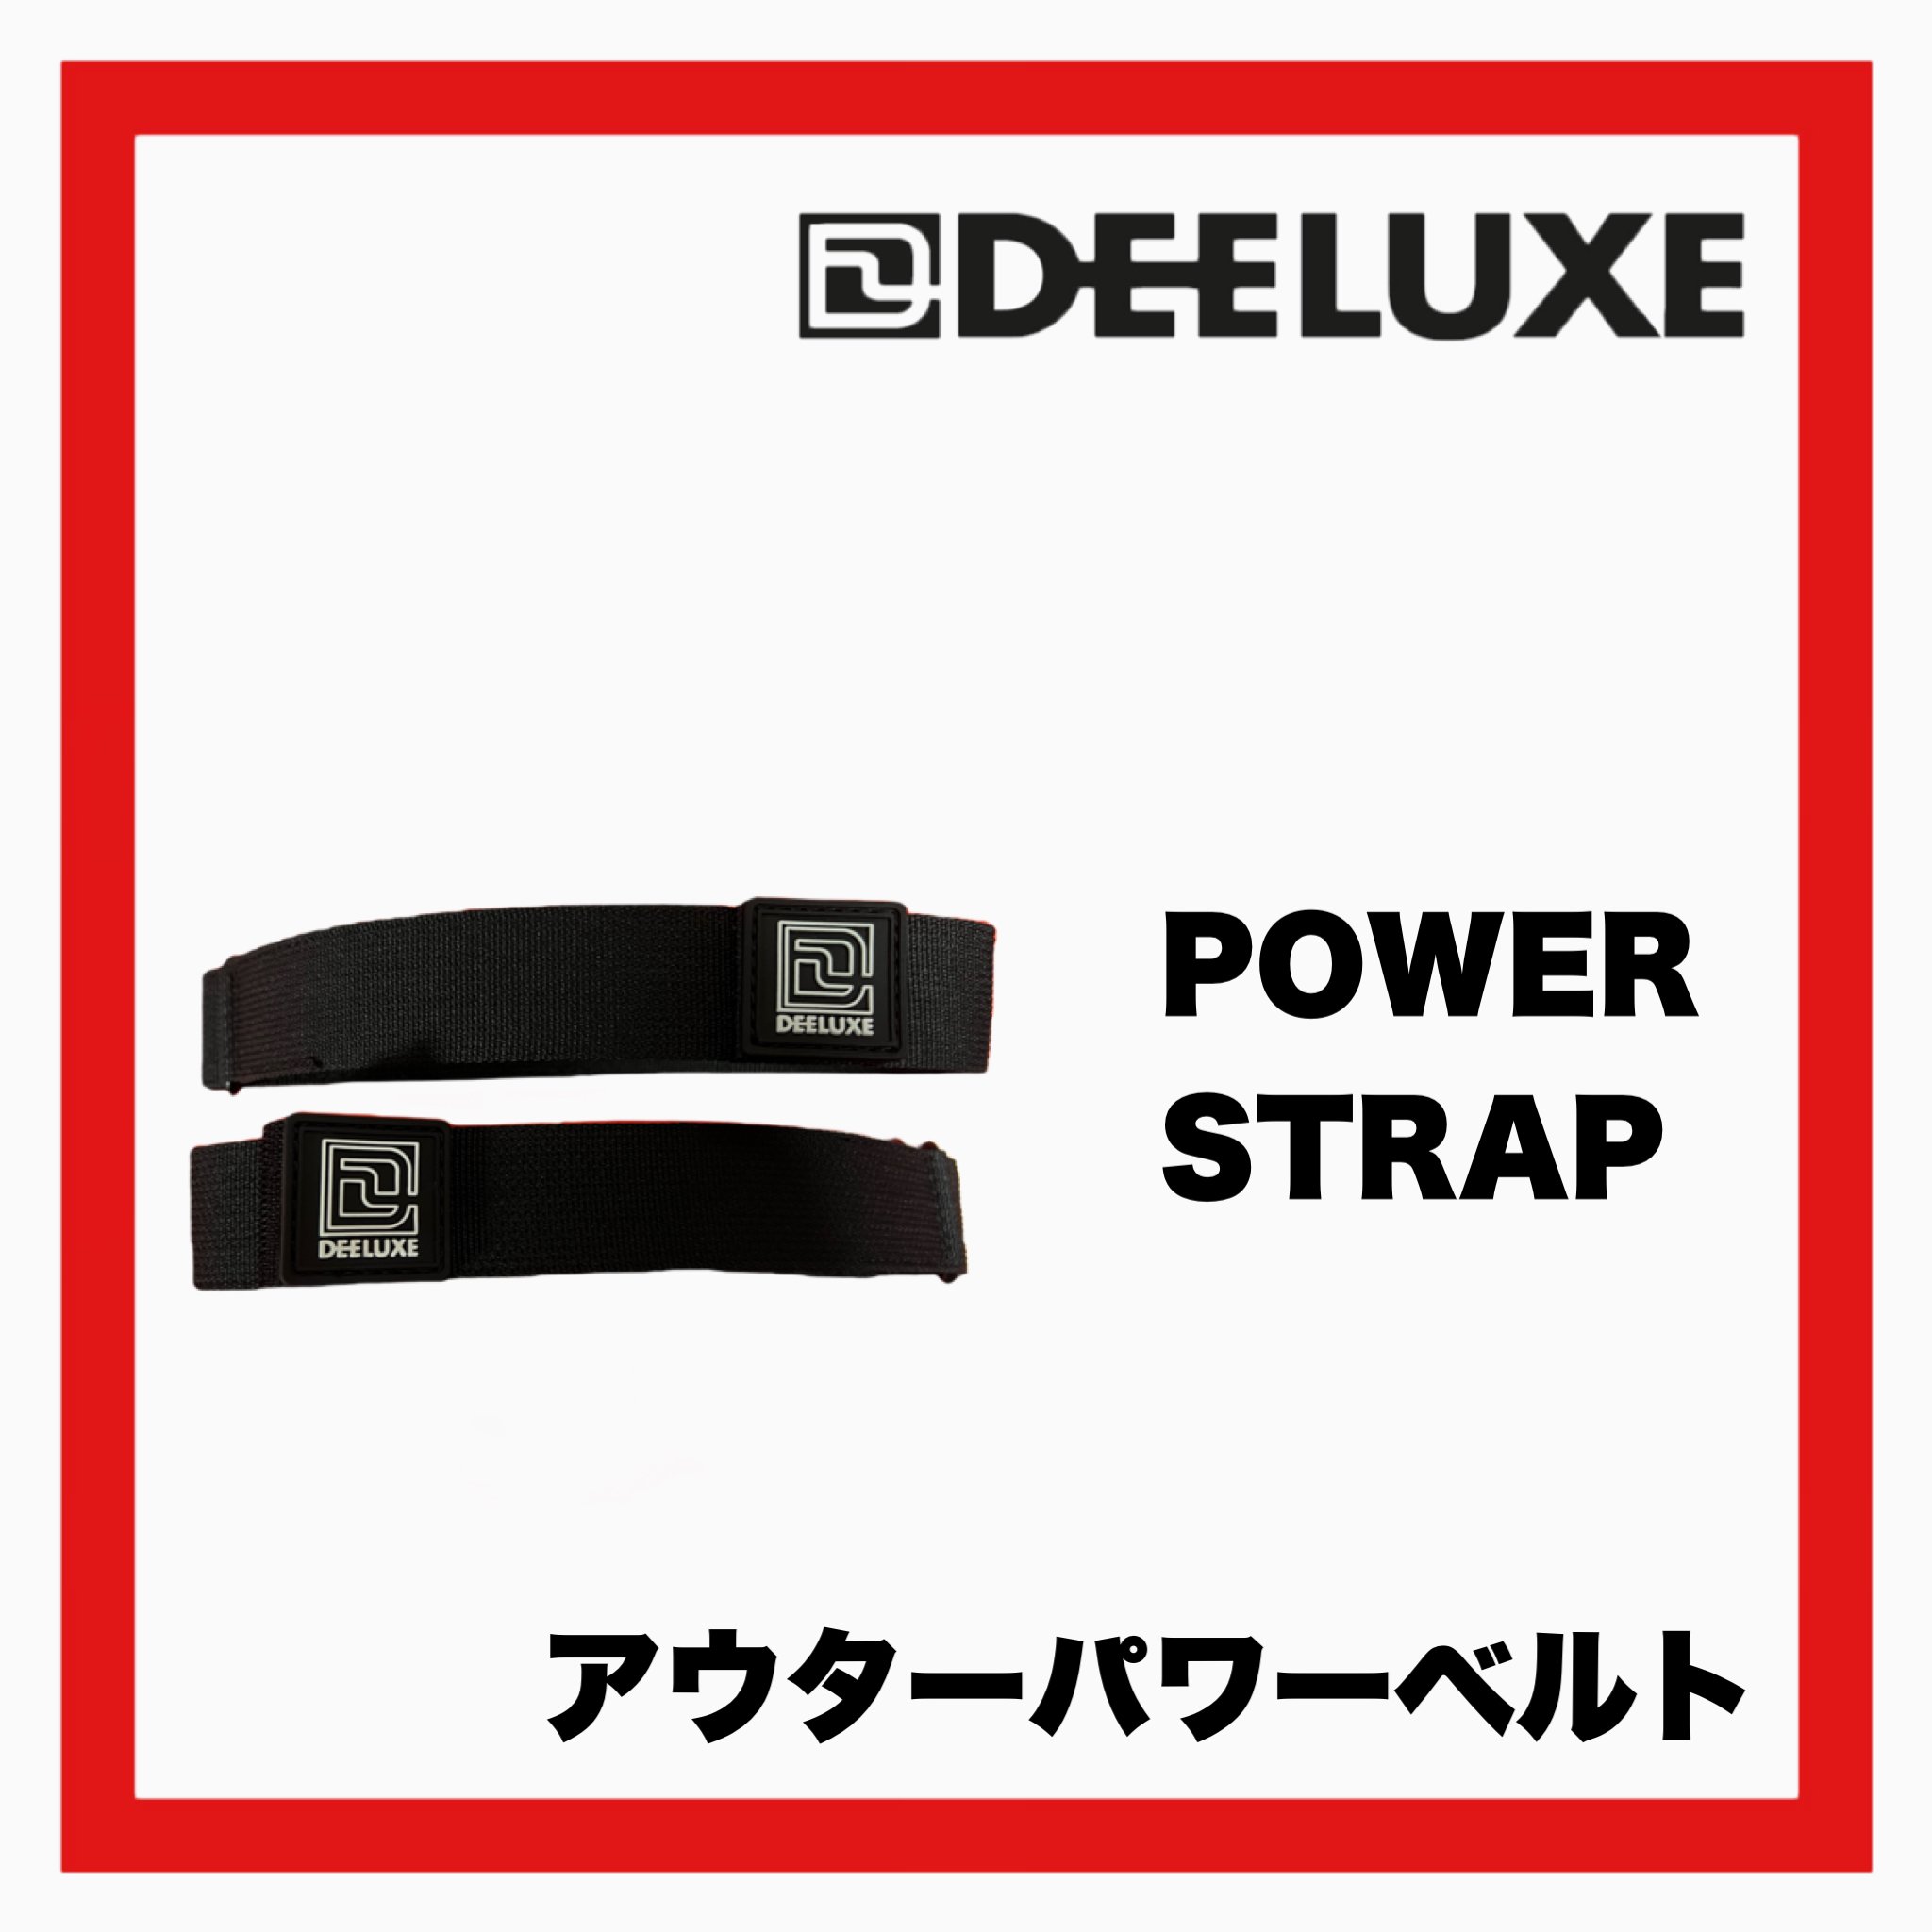 <img class='new_mark_img1' src='https://img.shop-pro.jp/img/new/icons14.gif' style='border:none;display:inline;margin:0px;padding:0px;width:auto;' />DEELUXE-POWER STRAP パワーストラップ